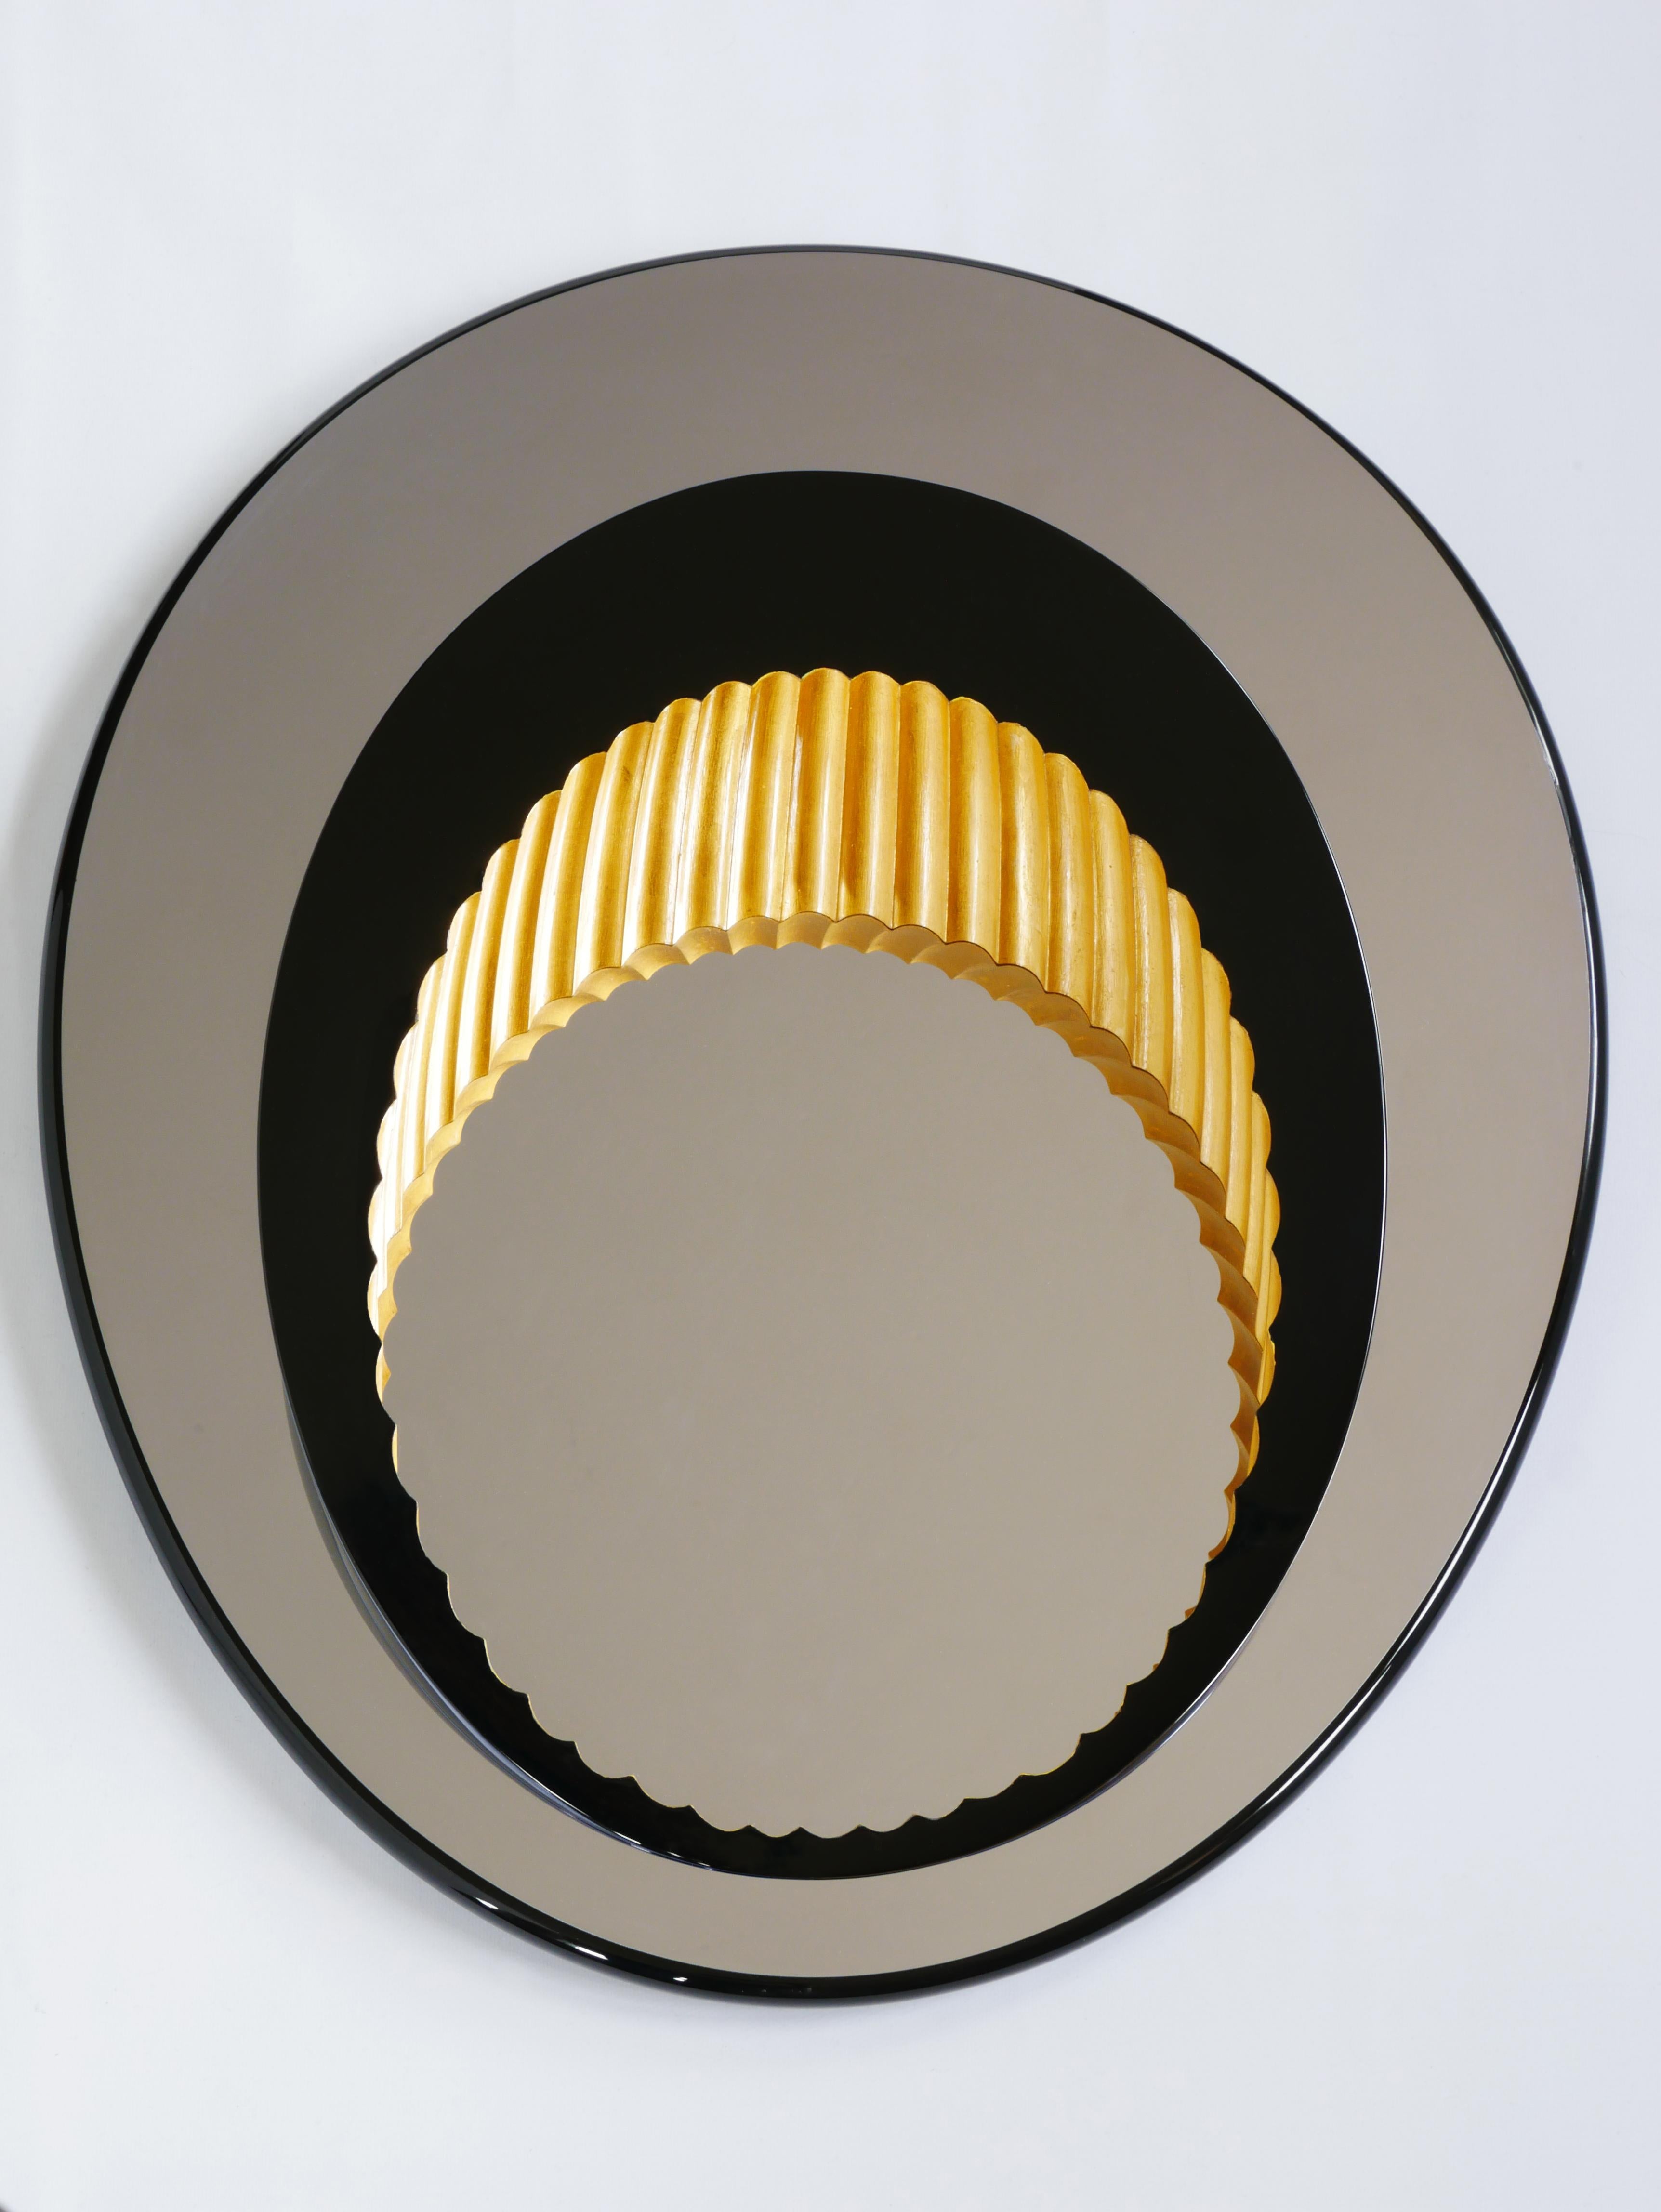 Wall mounted mirror sculpture. A black lacquered 